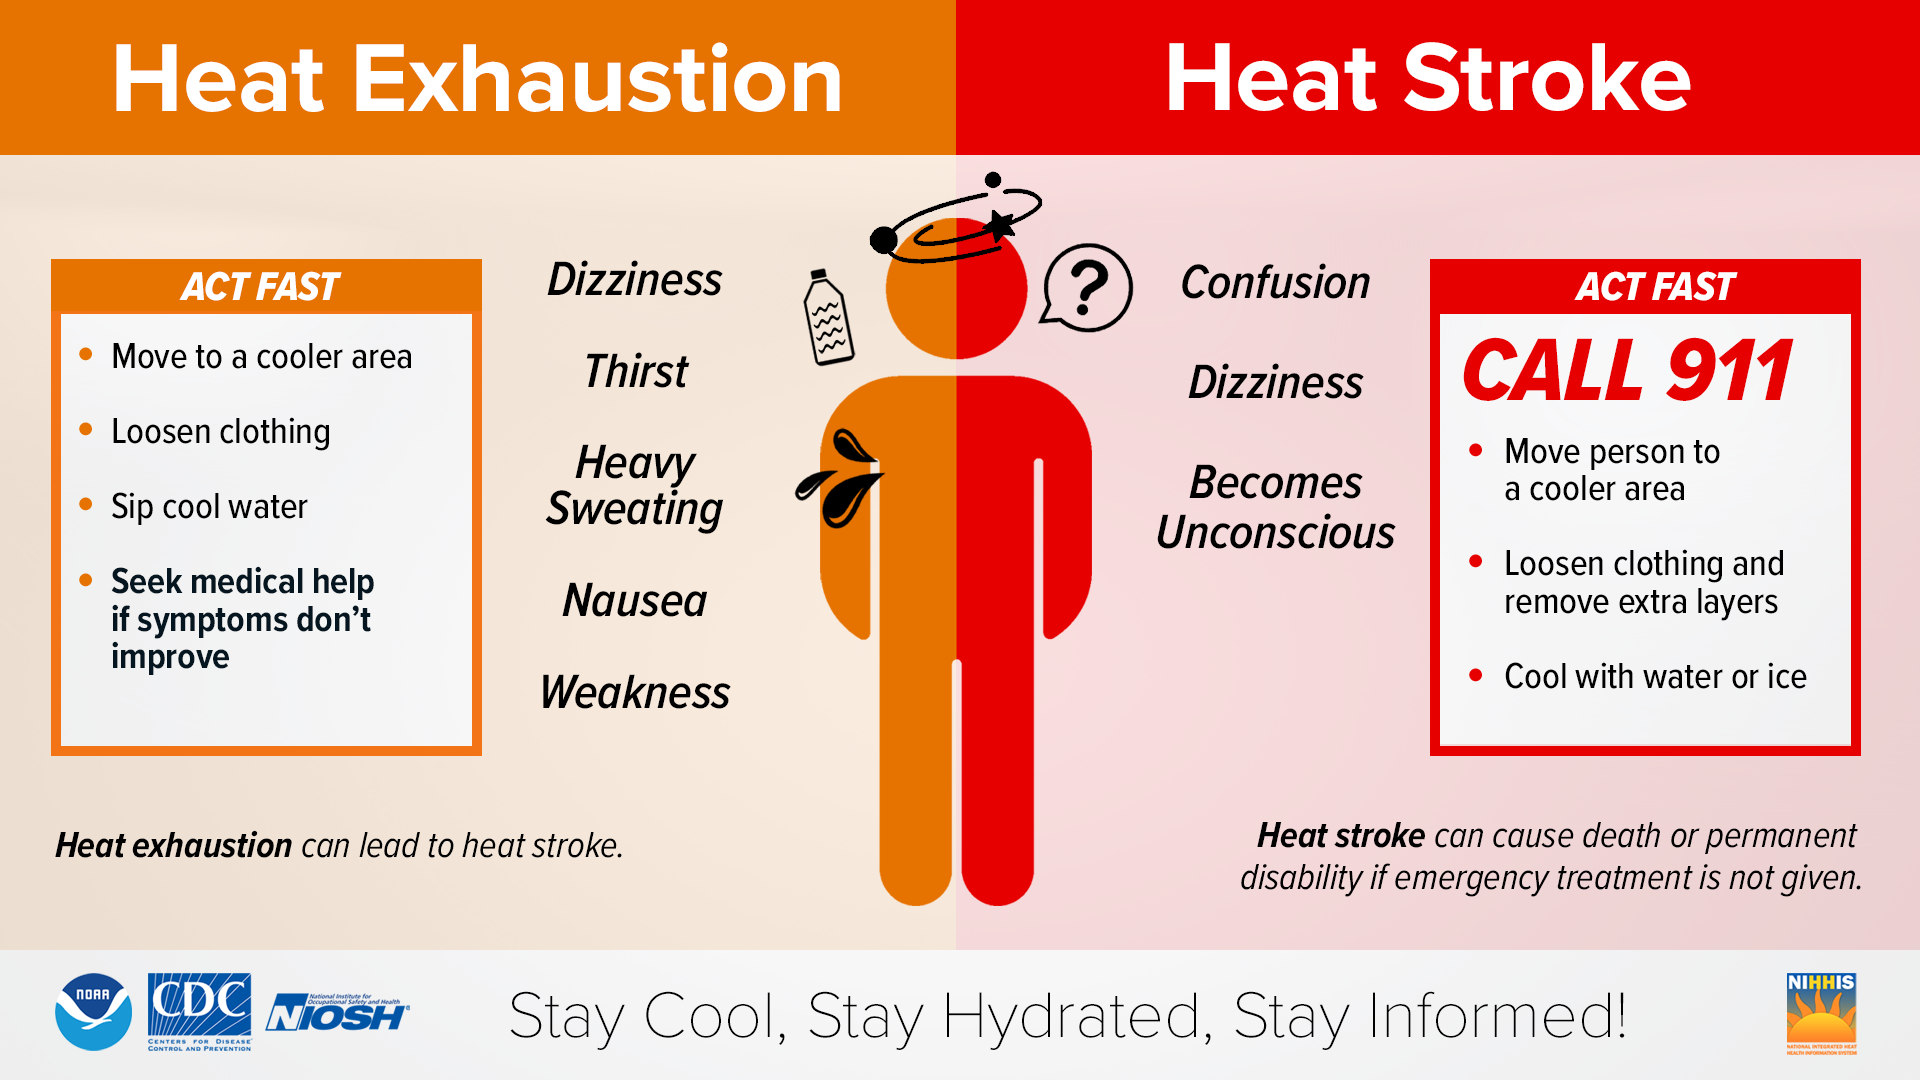 Flyer: in two halfs one red one, orange. At the center there is a man showing signs of heat exhaustion and heatstroke. (Orange) Heat Exhaustion ACT FAST • Move to a cooler area • Loosen clothing • Sip cool water • Seek medical help if symptoms don't improve ACT FAST CALL 911 • Move person to a cooler area • Loosen clothing and remove extra layers • Cool with water or ice Heat exhaustion can lead to heat stroke. Dizziness Thirst Heavy Sweating Nausea Weakness Confusion Dizziness Becomes Unconscious (Red) Heat Stroke ACT FAST CALL 911 • Move person to a cooler area • Loosen clothing and remove extra layers • Cool with water or ice Heat exhaustion can lead to heat stroke. Heat stroke can cause death or permanent disability if emergency treatment is not given. Confusion Dizziness Becomes Unconscious Stay Cool, Stay Hydrated, Stay Informed! At the bottom left you can see the logos of the CDC, NIOSH, and Nora To the bottom right there is a logo for the NIHHIS